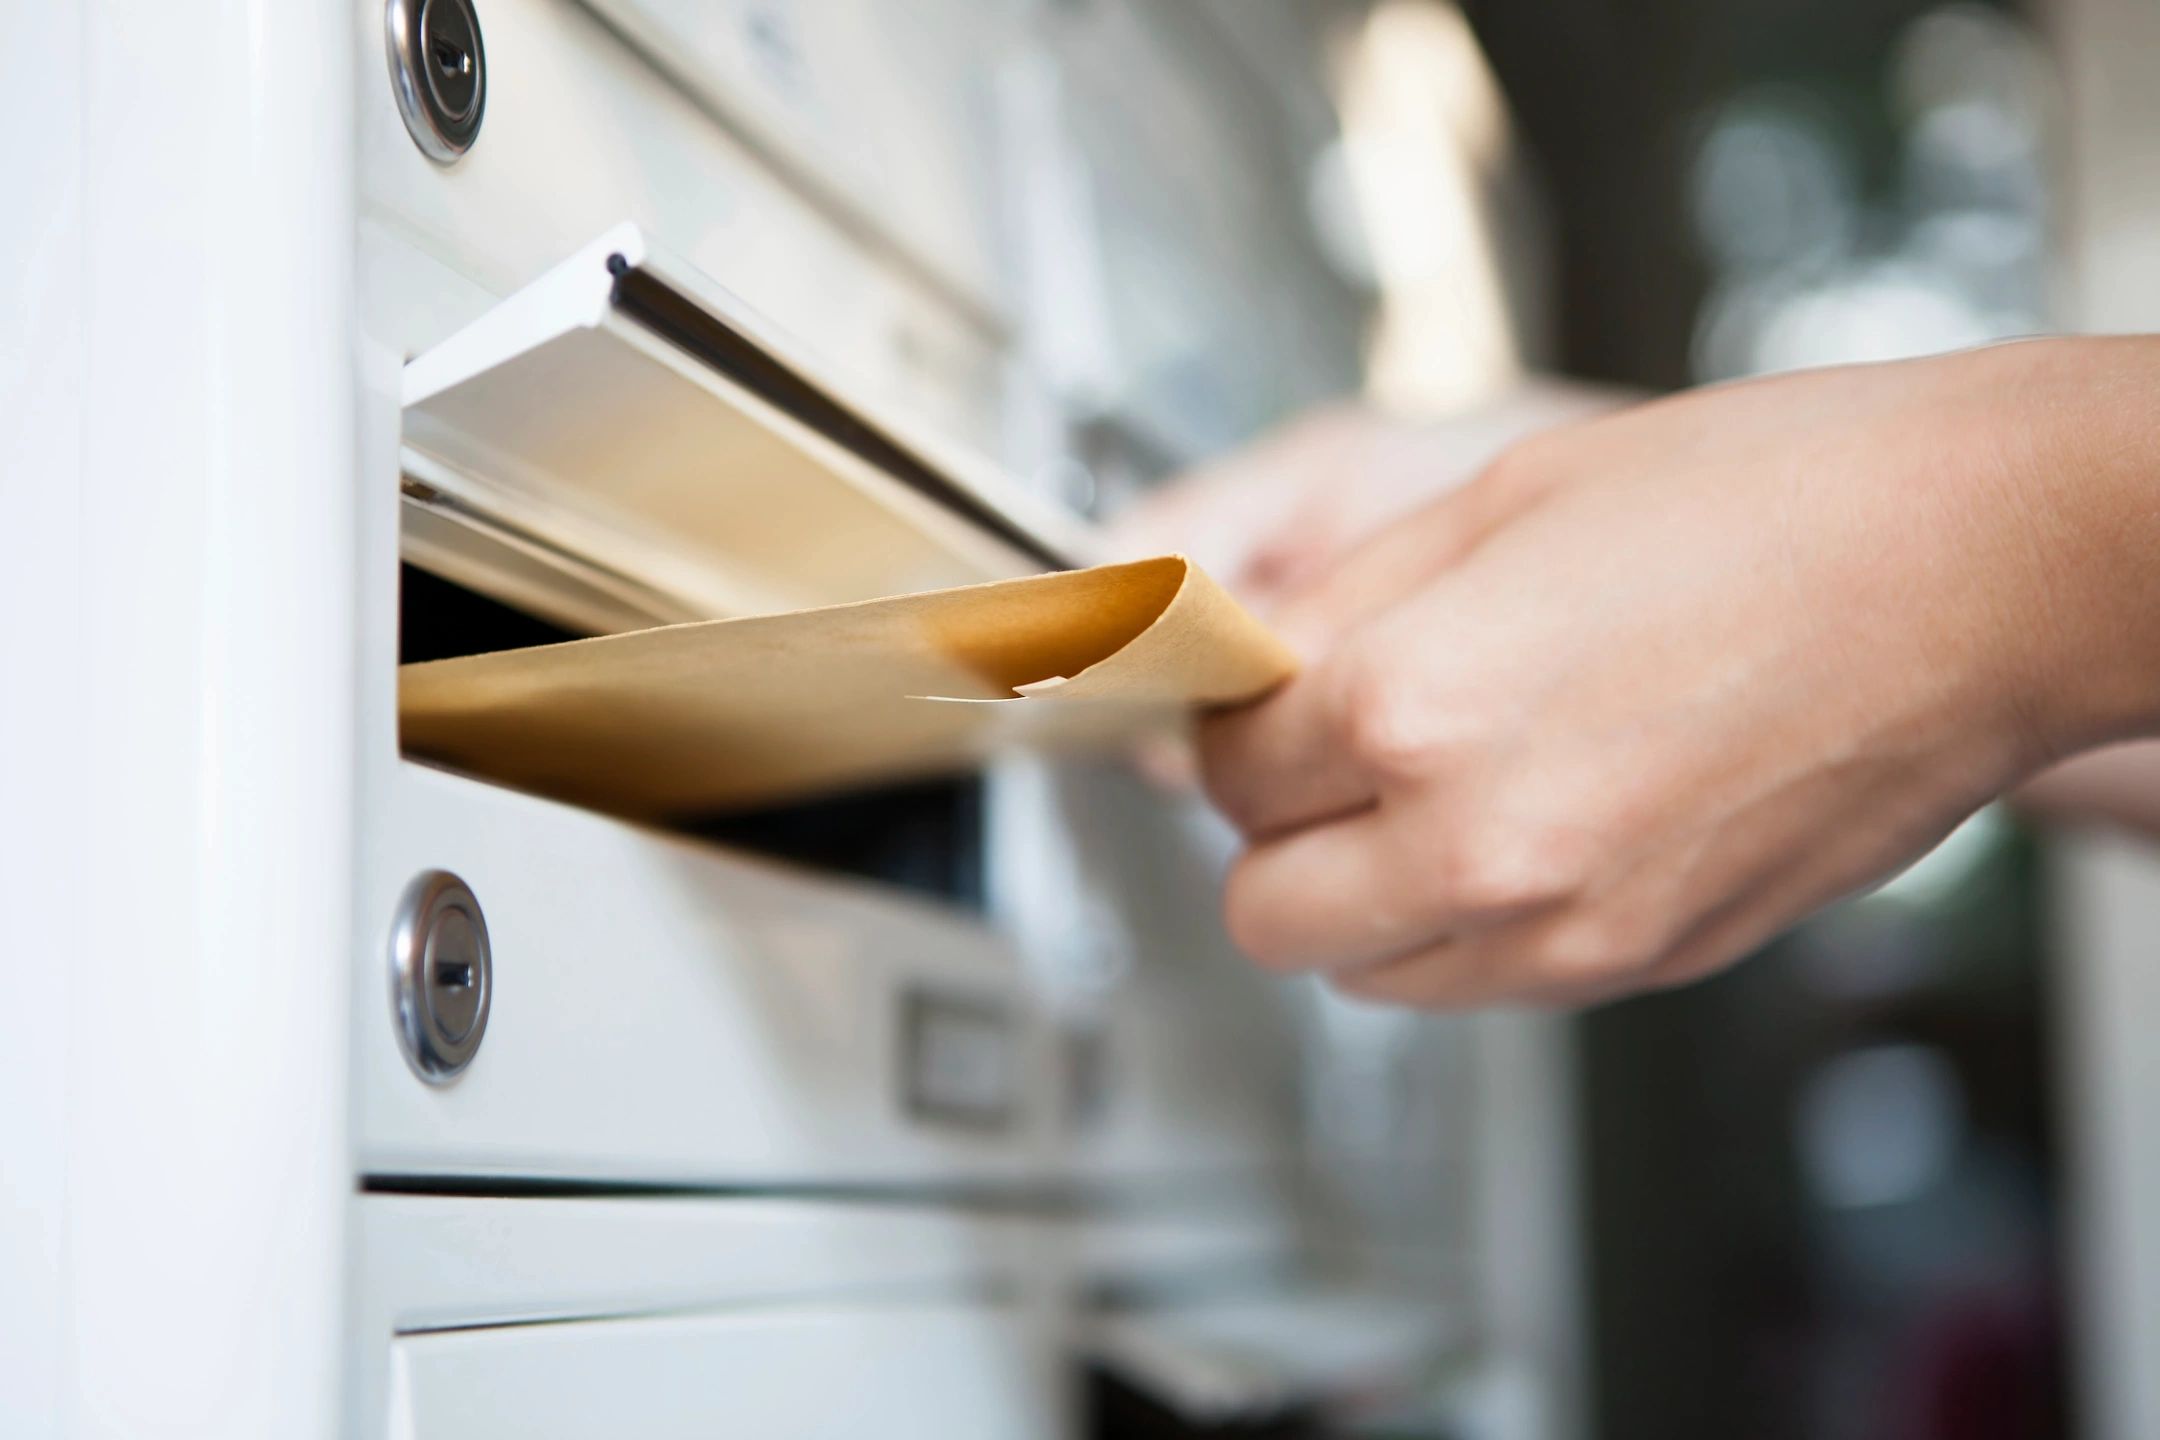 Serving documents through letterbox